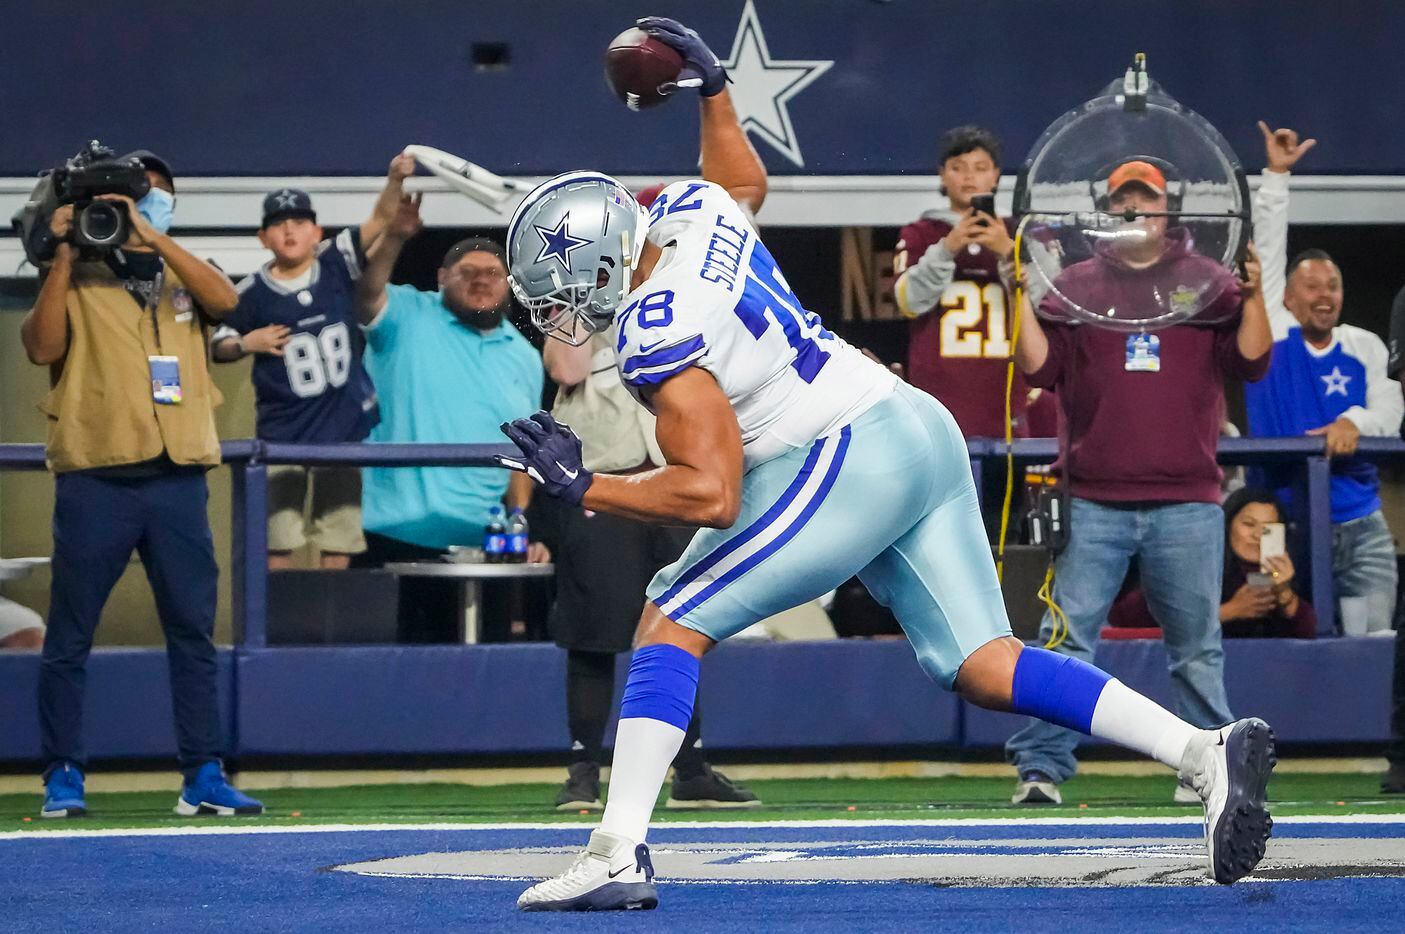 Dallas Cowboys offensive tackle Terence Steele (78) spikes the ball after scoring on a 1-yard touchdown reception during the first half of an NFL football game against the Washington Football Team at AT&T Stadium on Sunday, Dec. 26, 2021, in Arlington.